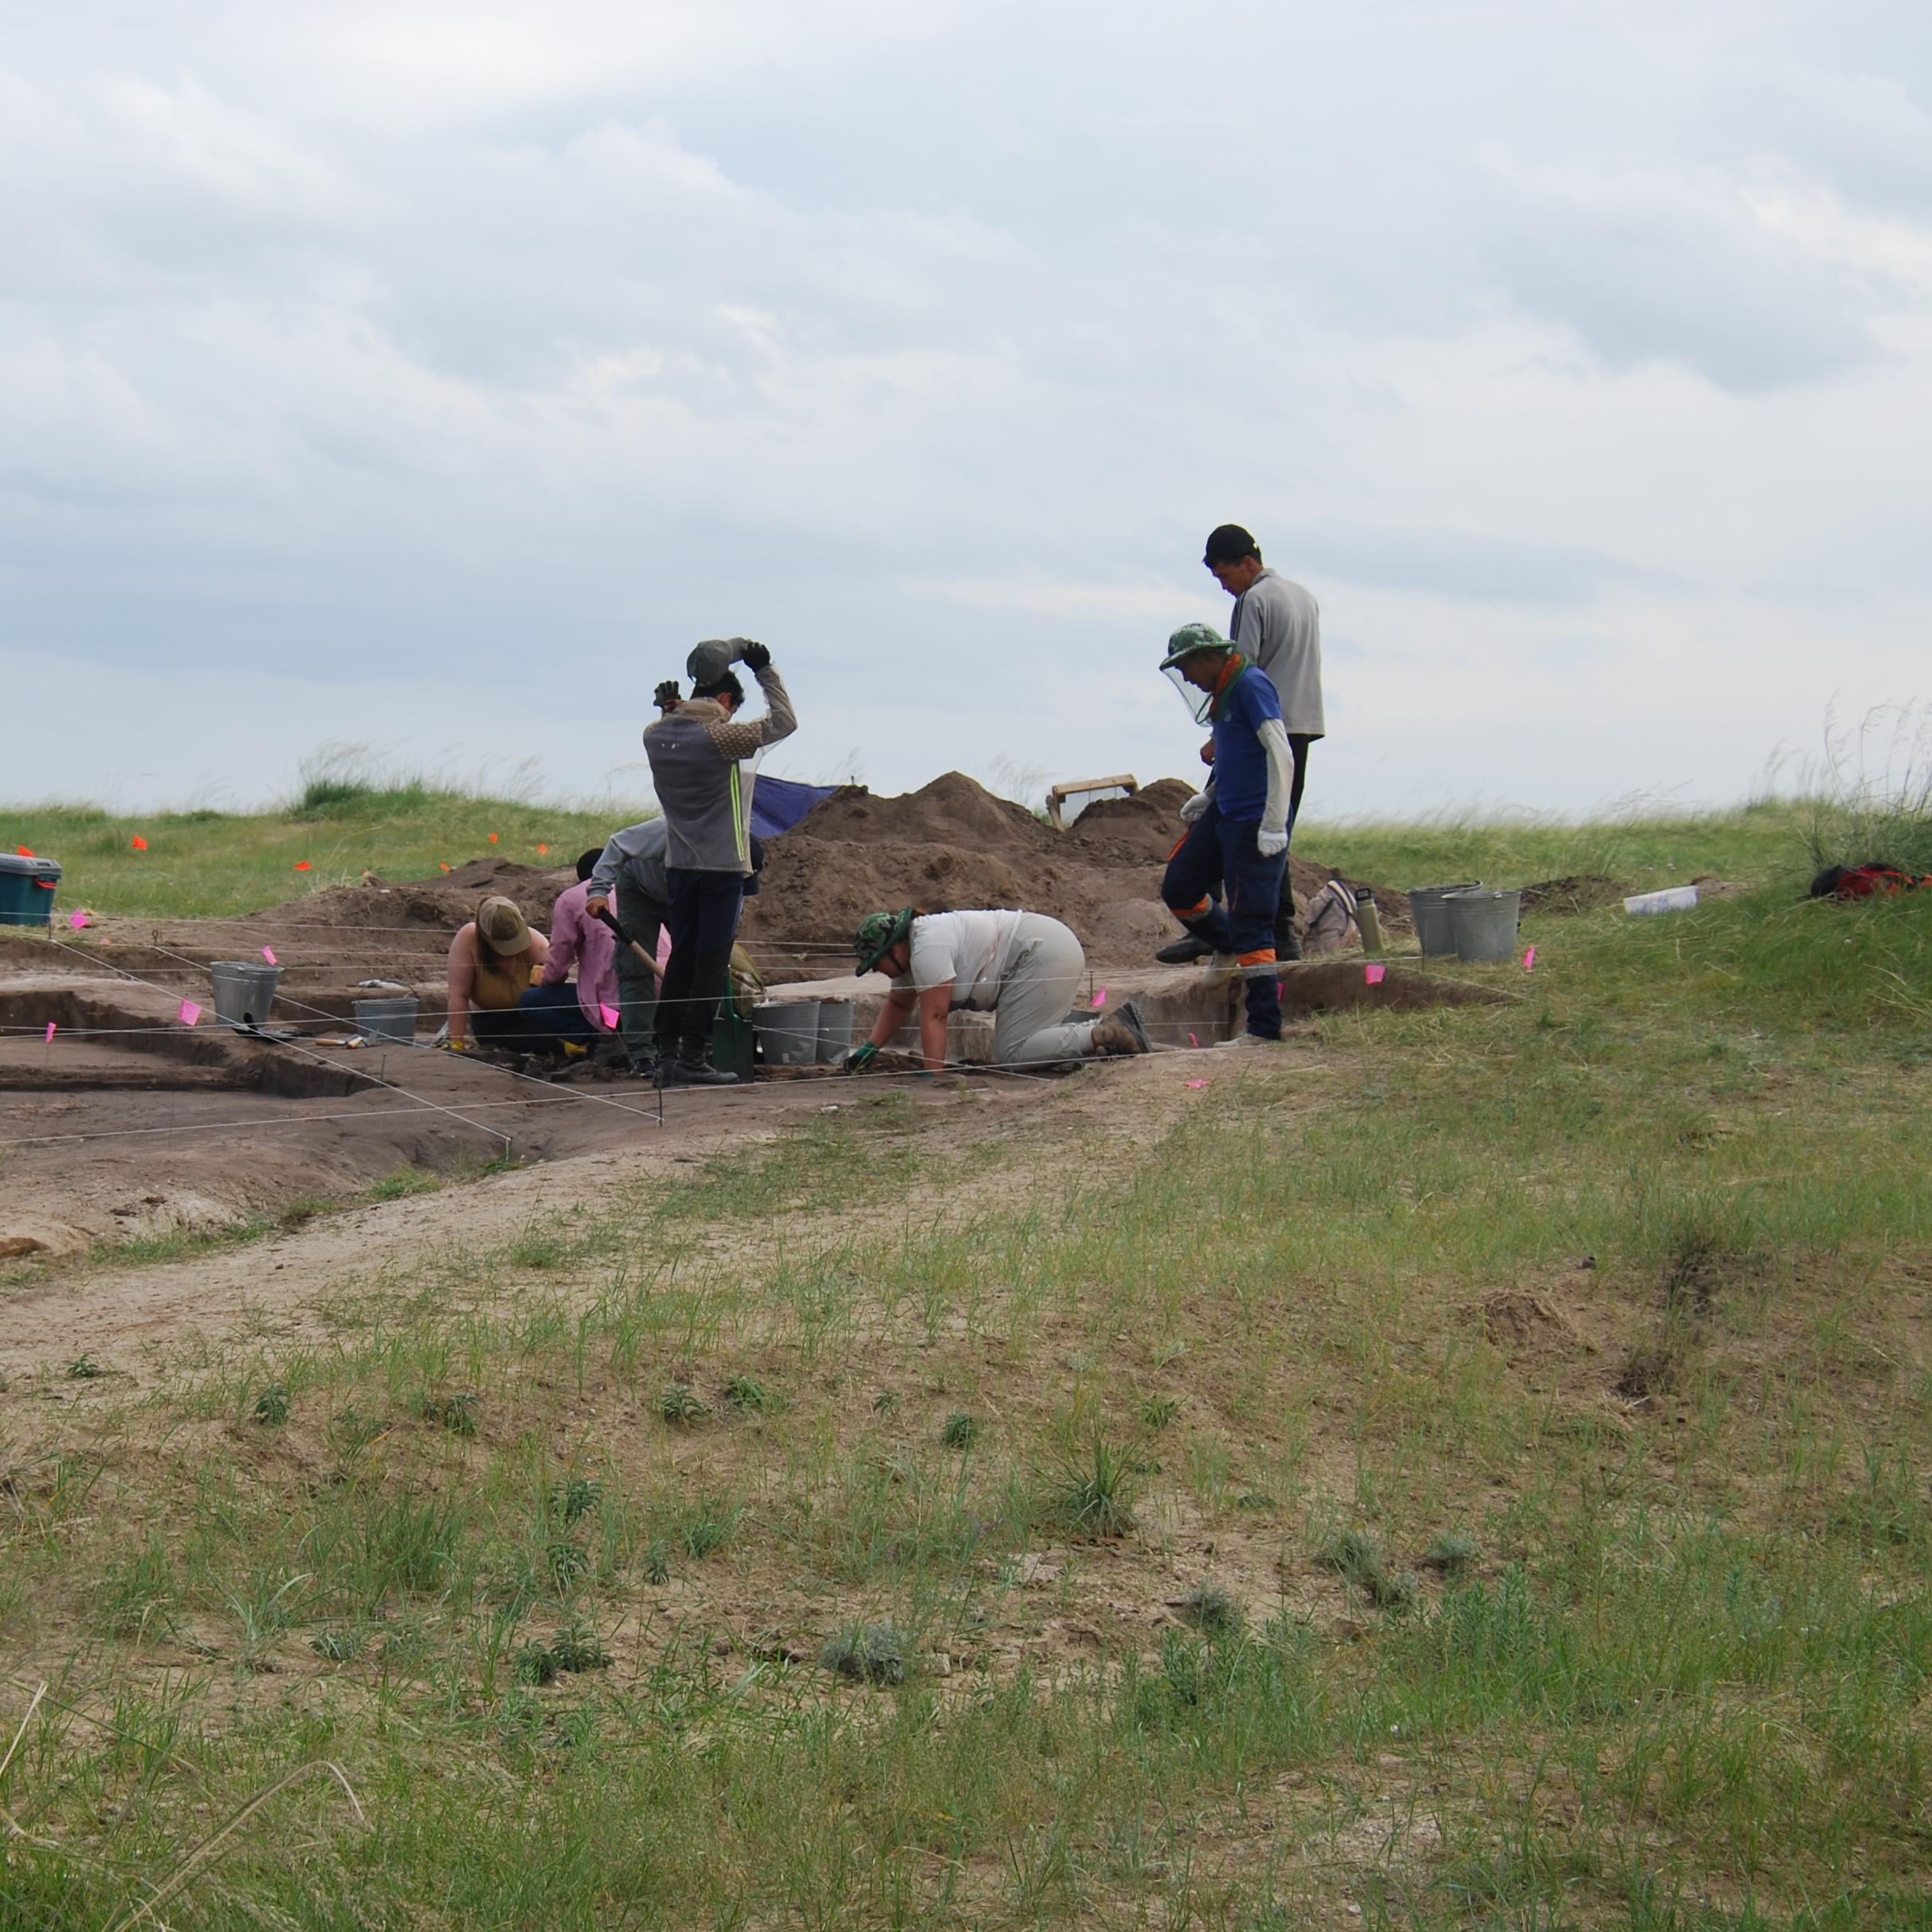 Archaeologists excavating around a burial site on the Gobi Steppe.